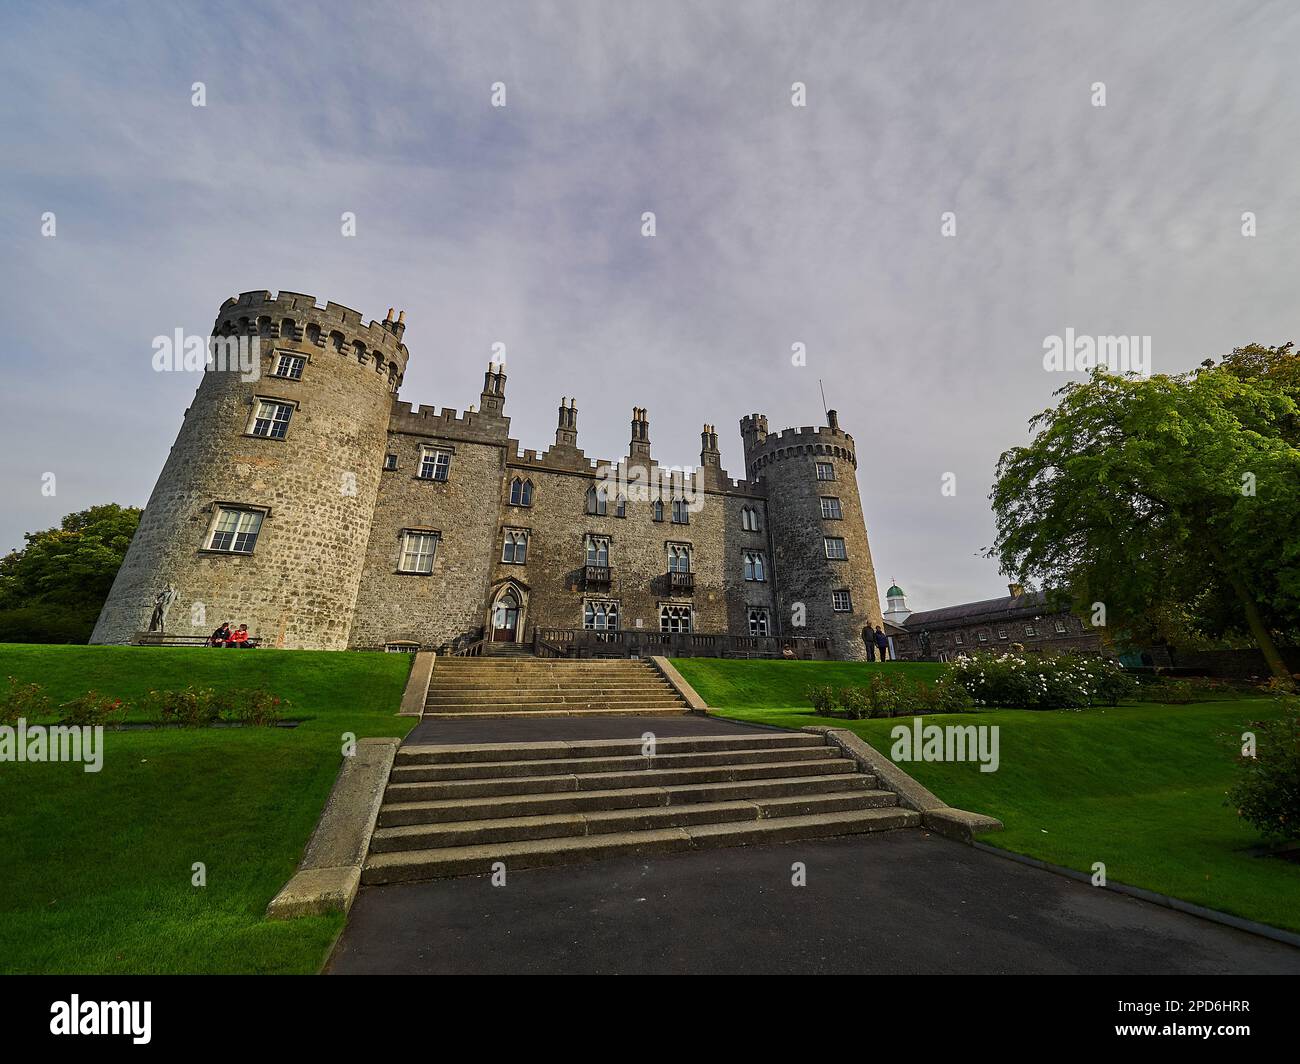 Kilkenny, Ireland - 09 23 2015: Kilkenny castle, an typical and old castle from medival times. Stock Photo